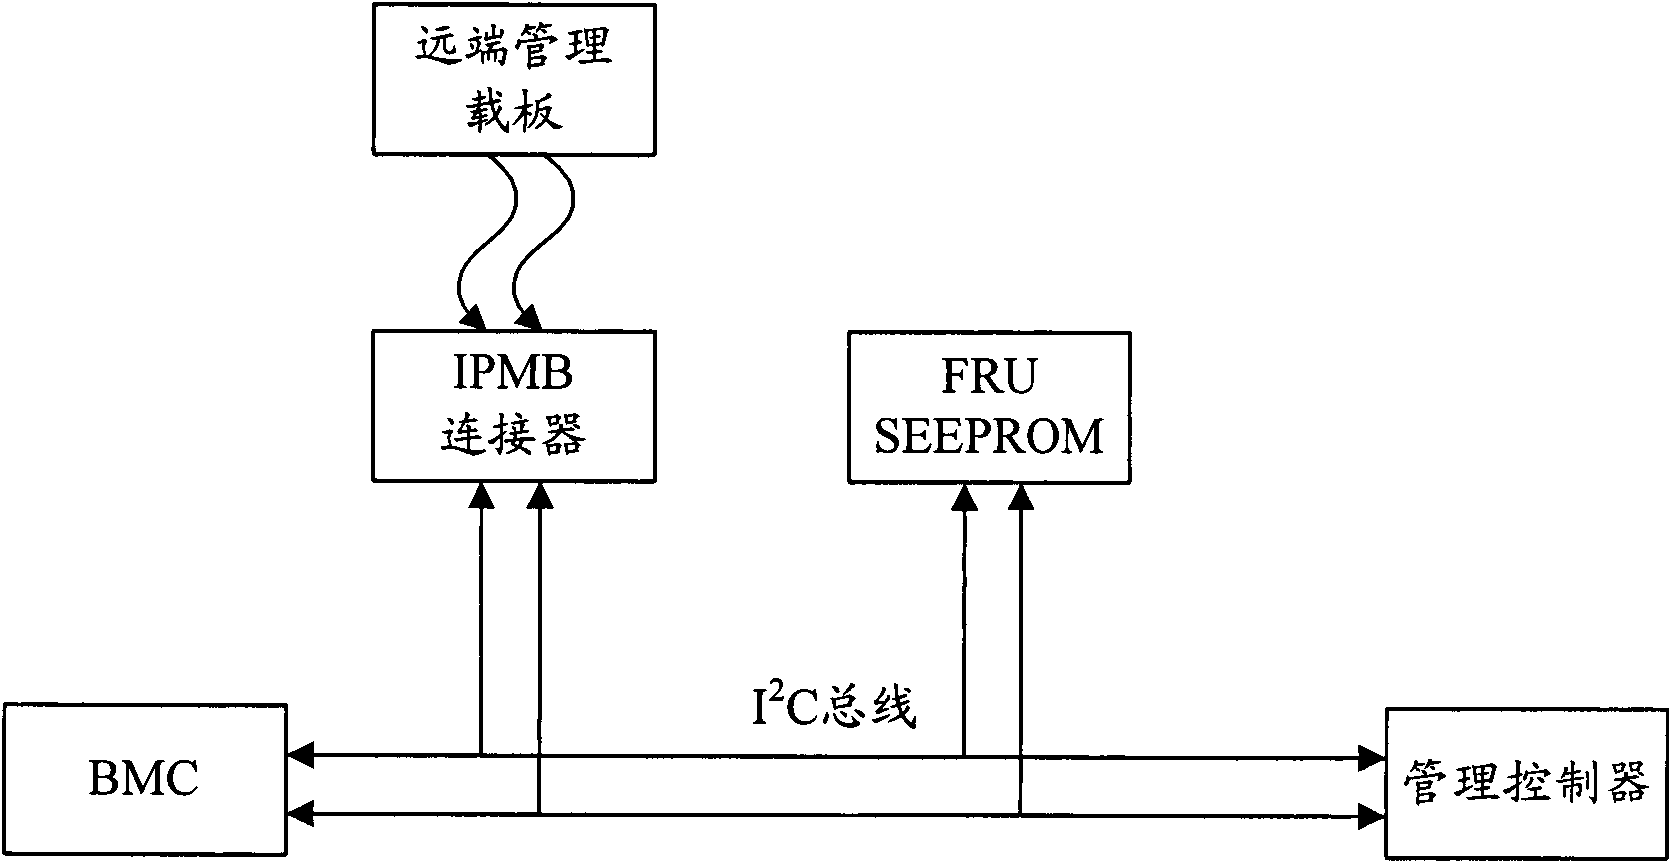 Intelligent platform management interface (IPMI) message transmission device, system and computer equipment